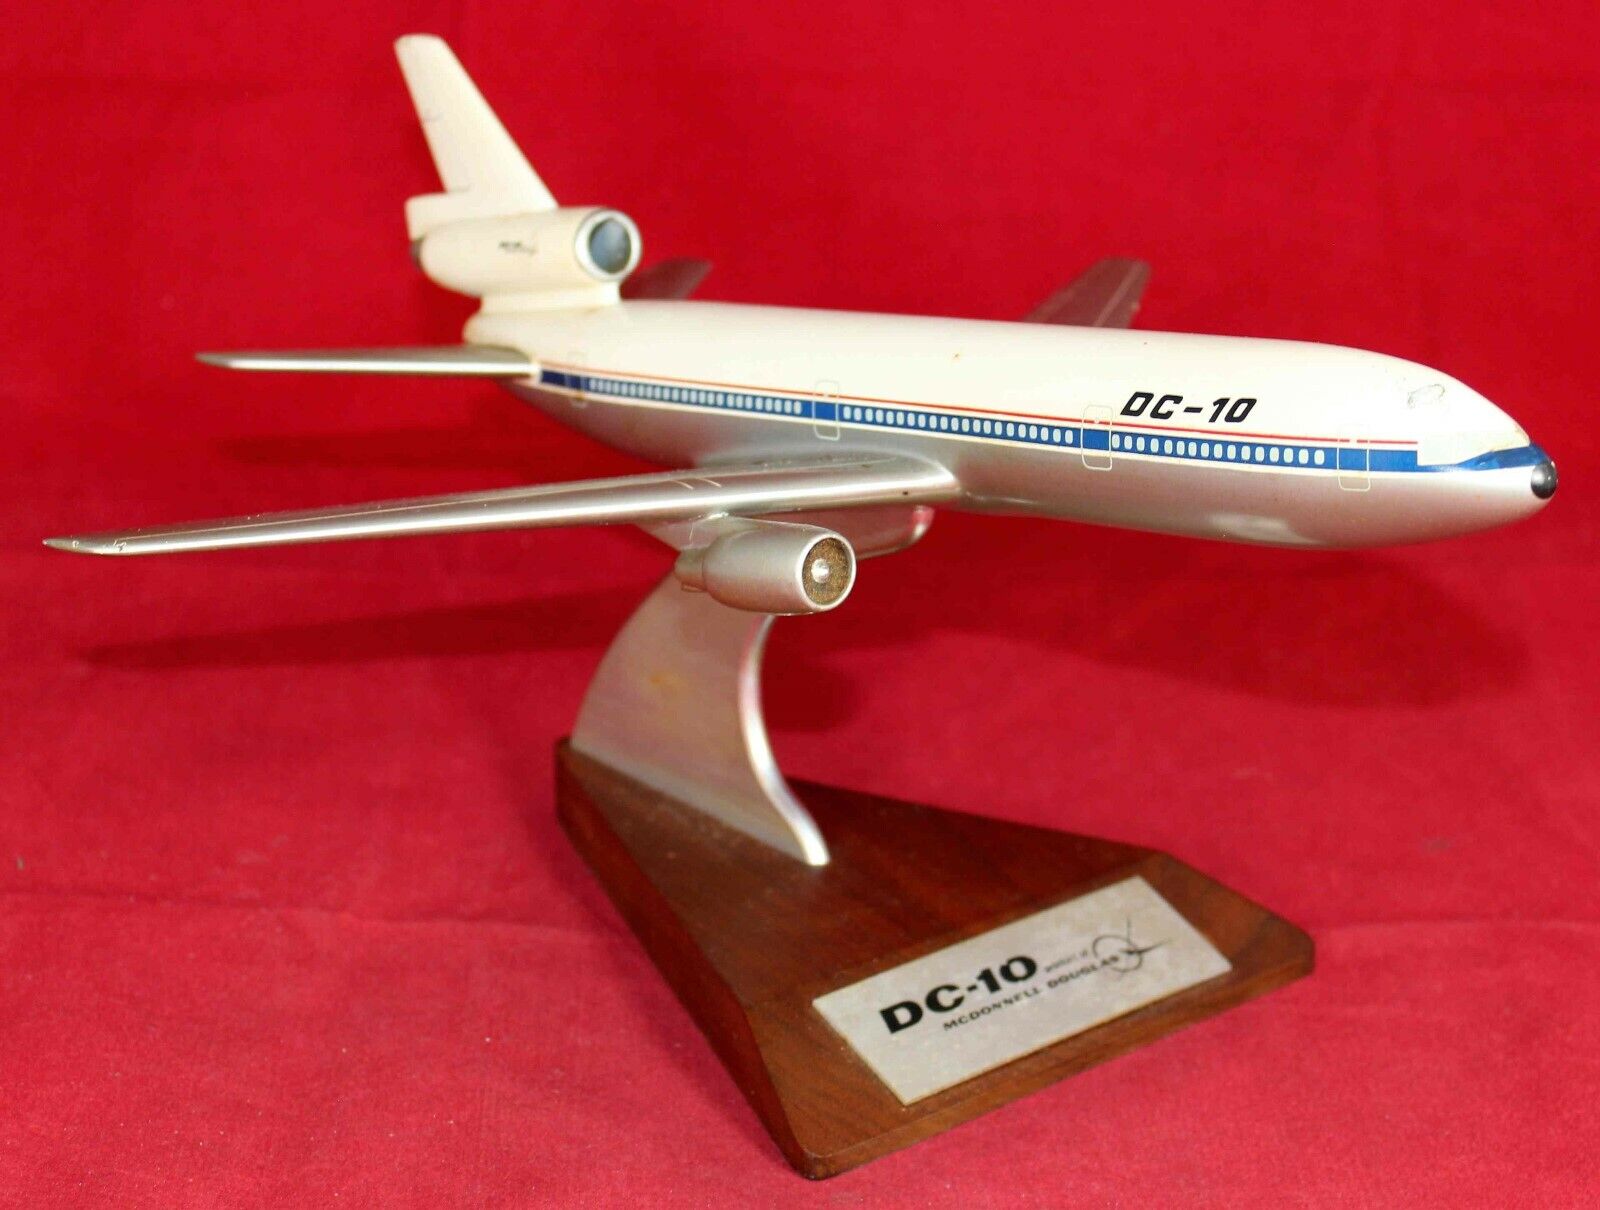 DC-10 McDonnell Douglas Model Airplane - Executive Gift - Pacmin? - 13.5\